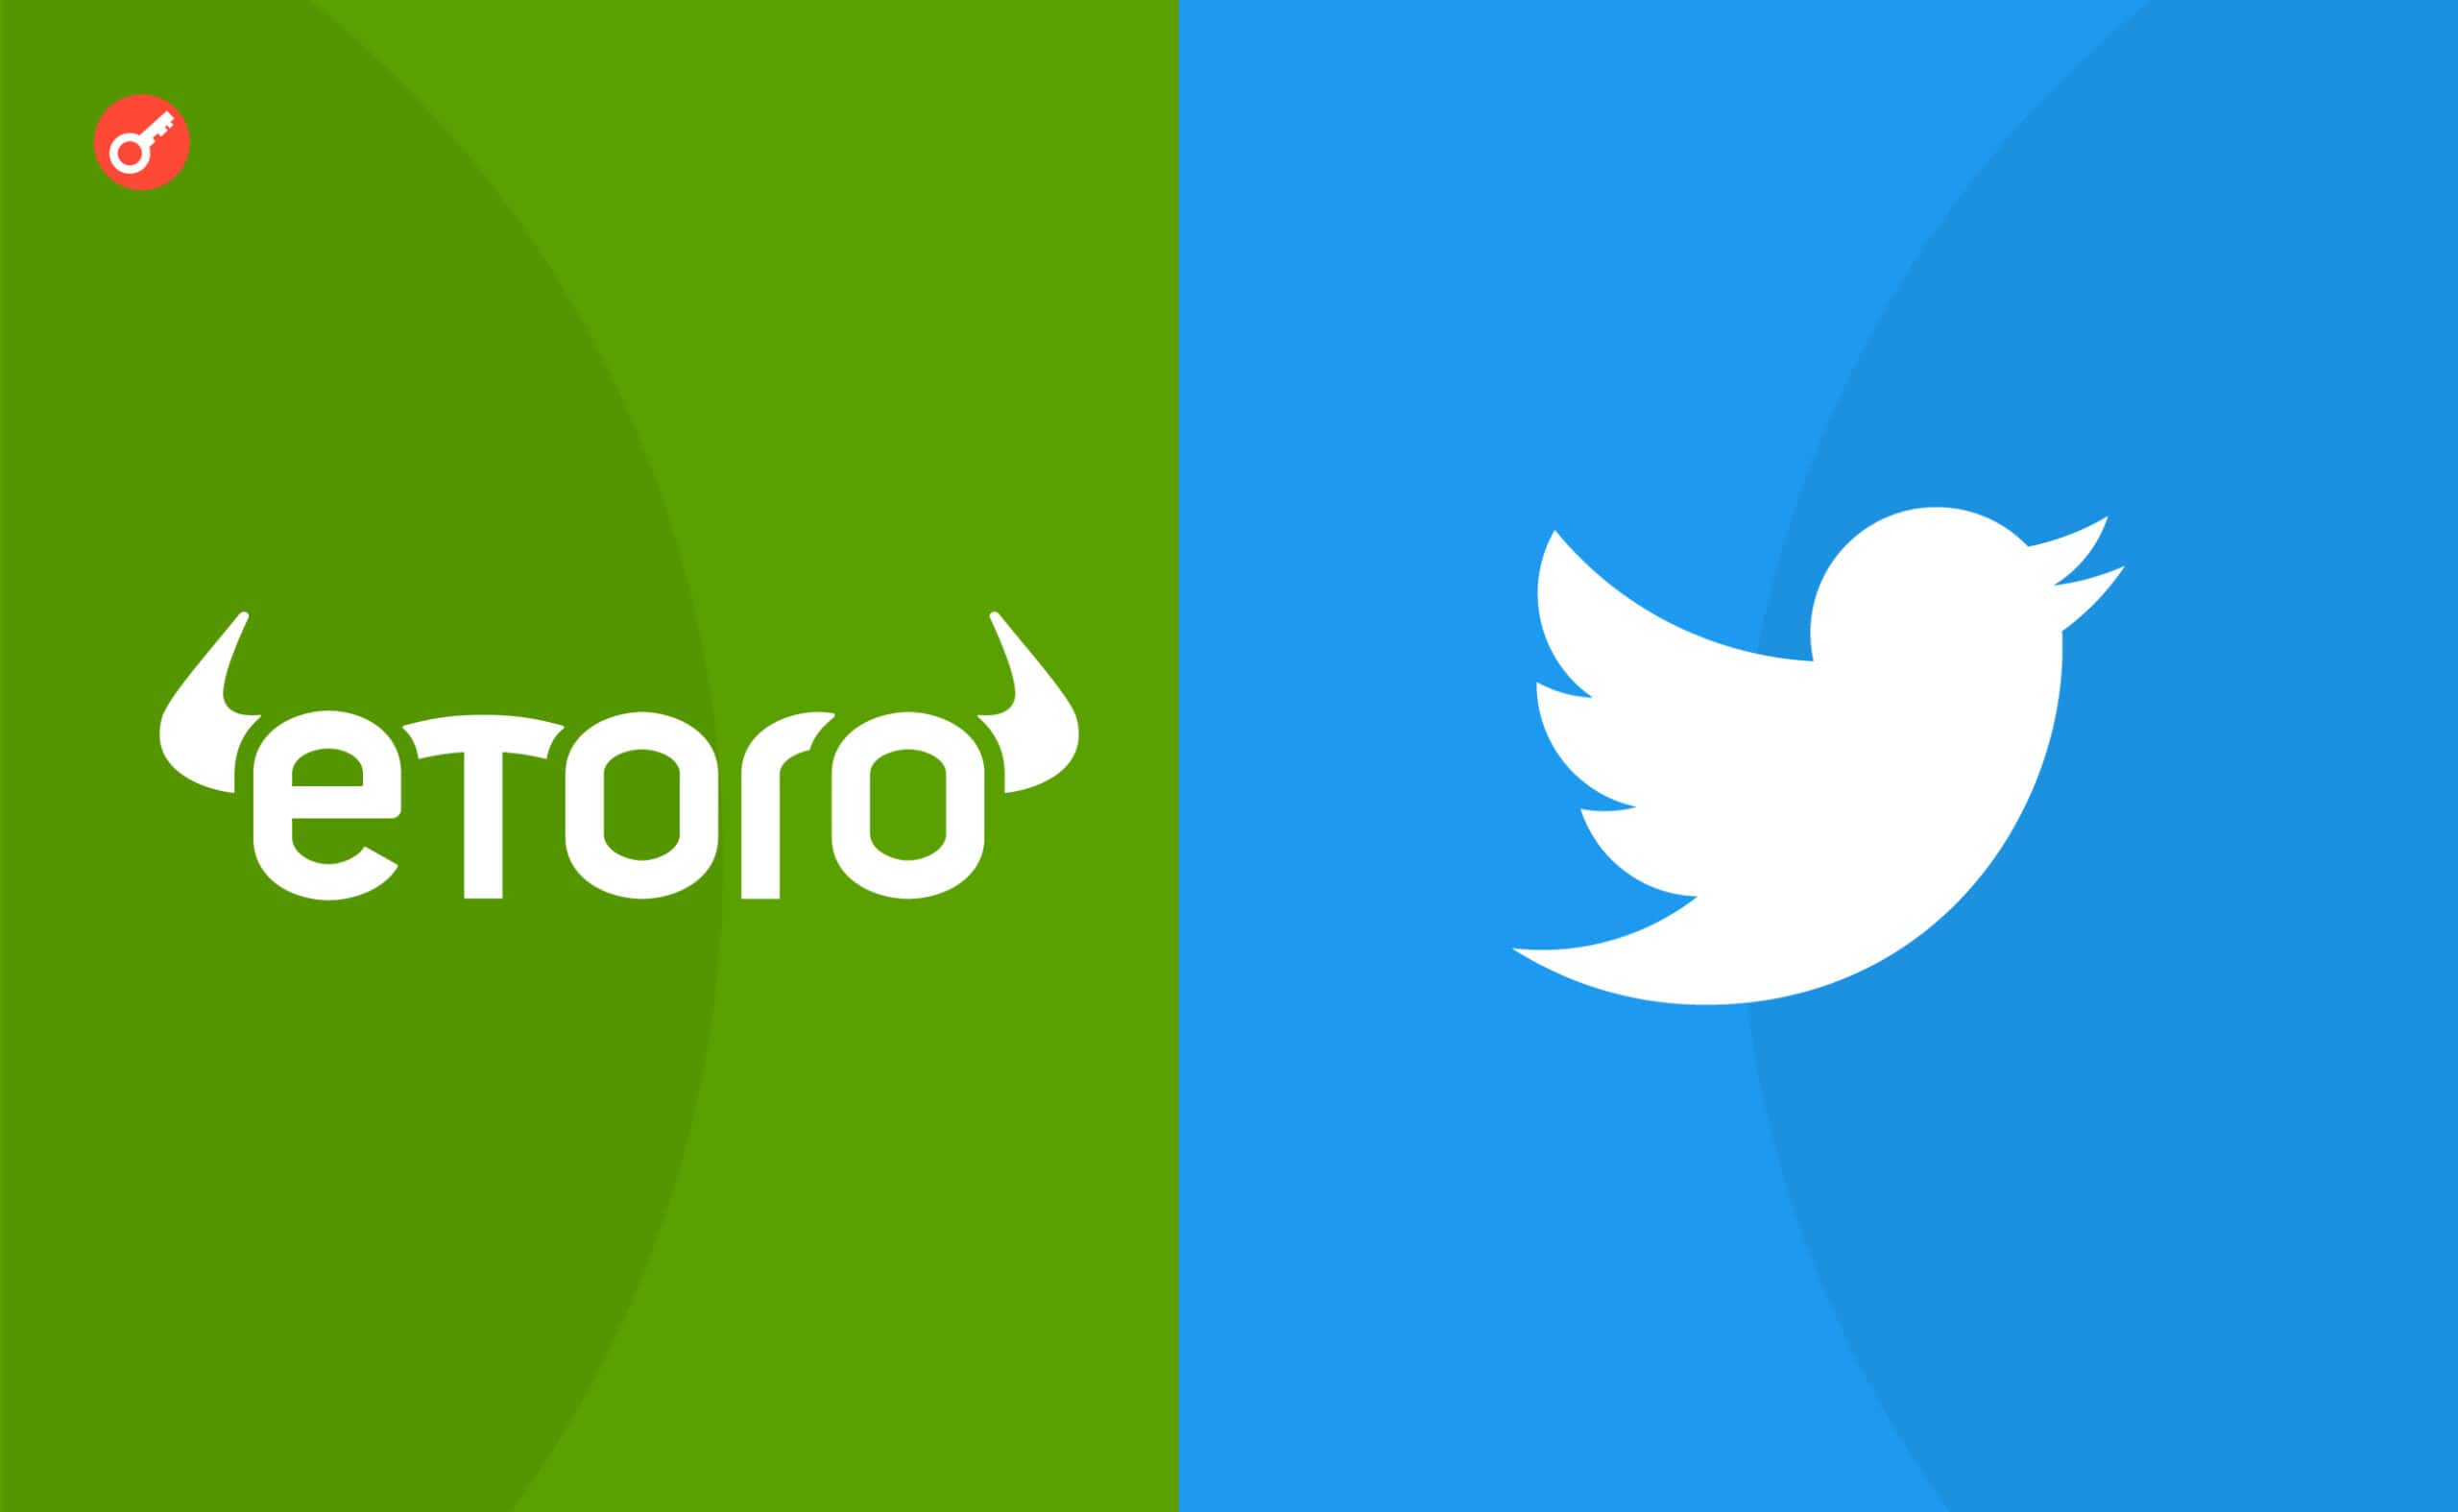 Twitter Teams Up with eToro to Expand Trading and Investment Options